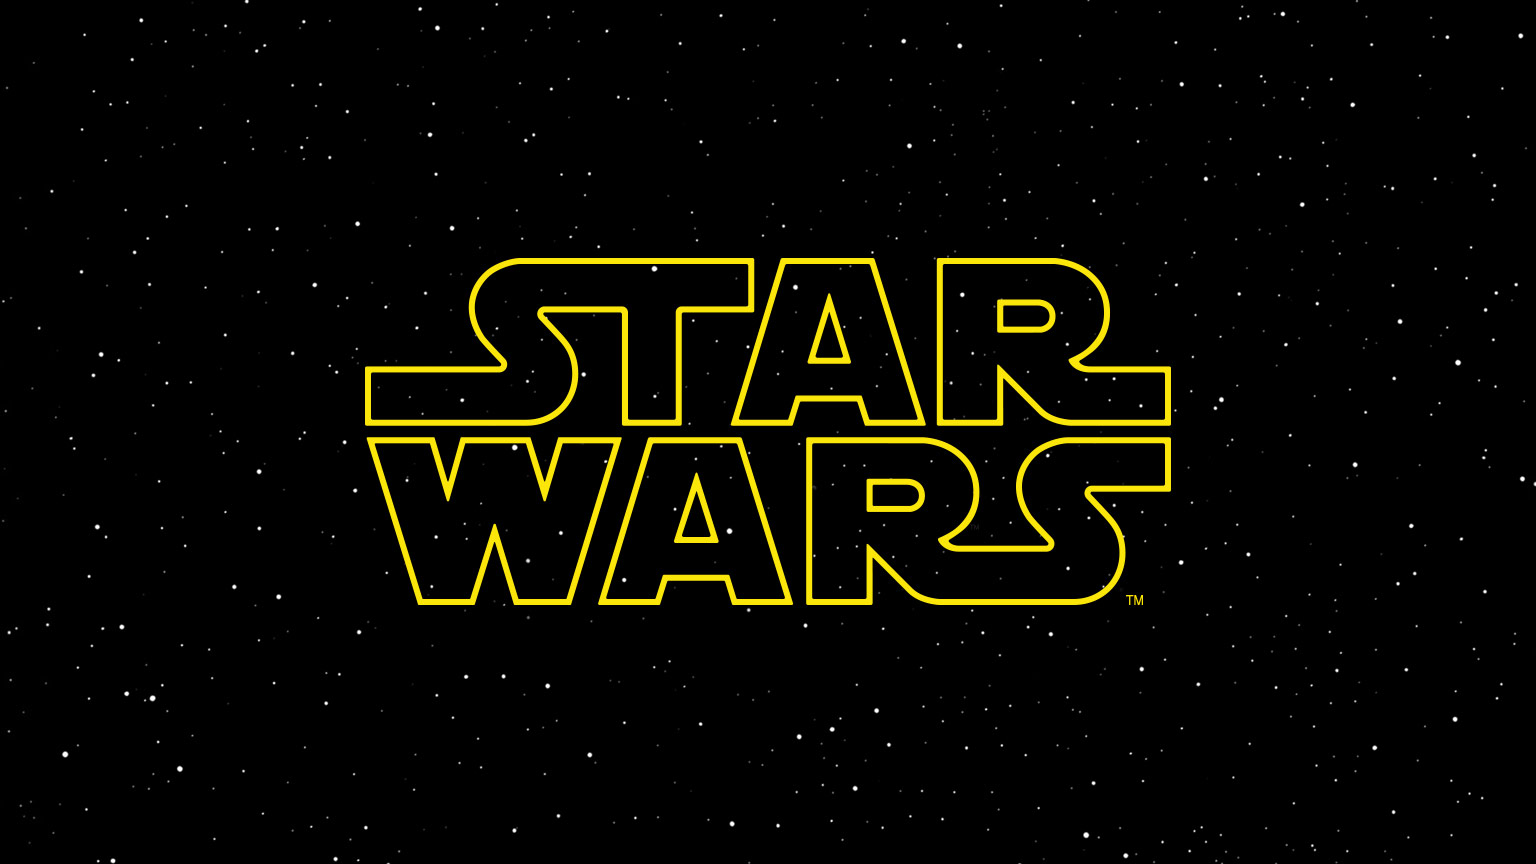 Star Wars logo for video introduction